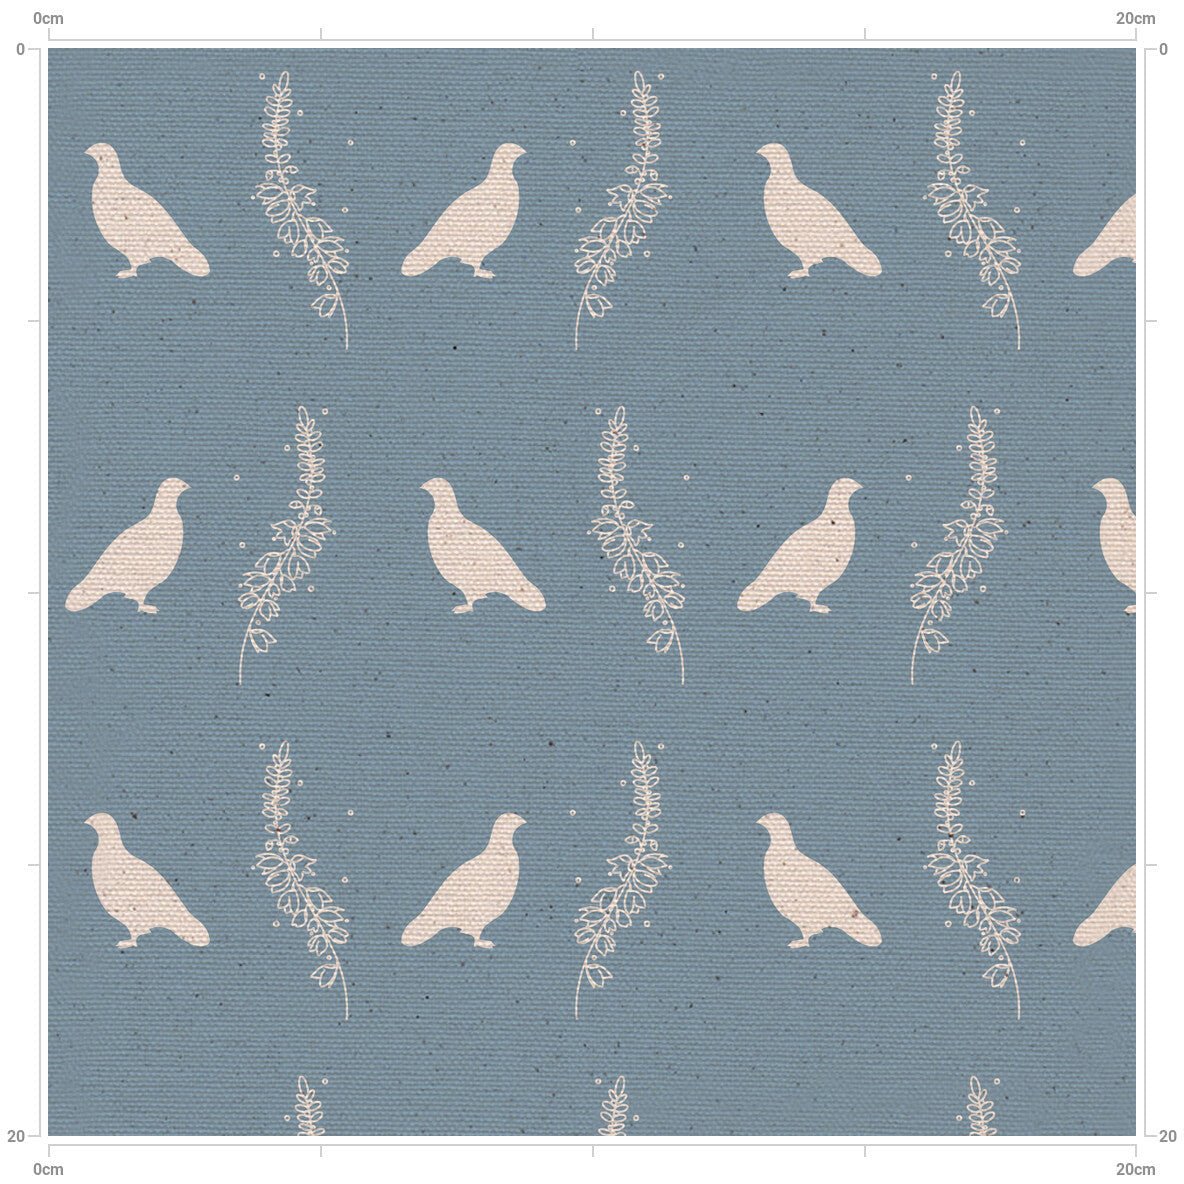 Grouse & Heather Solid Background - F&B Crafts - F&B Designs